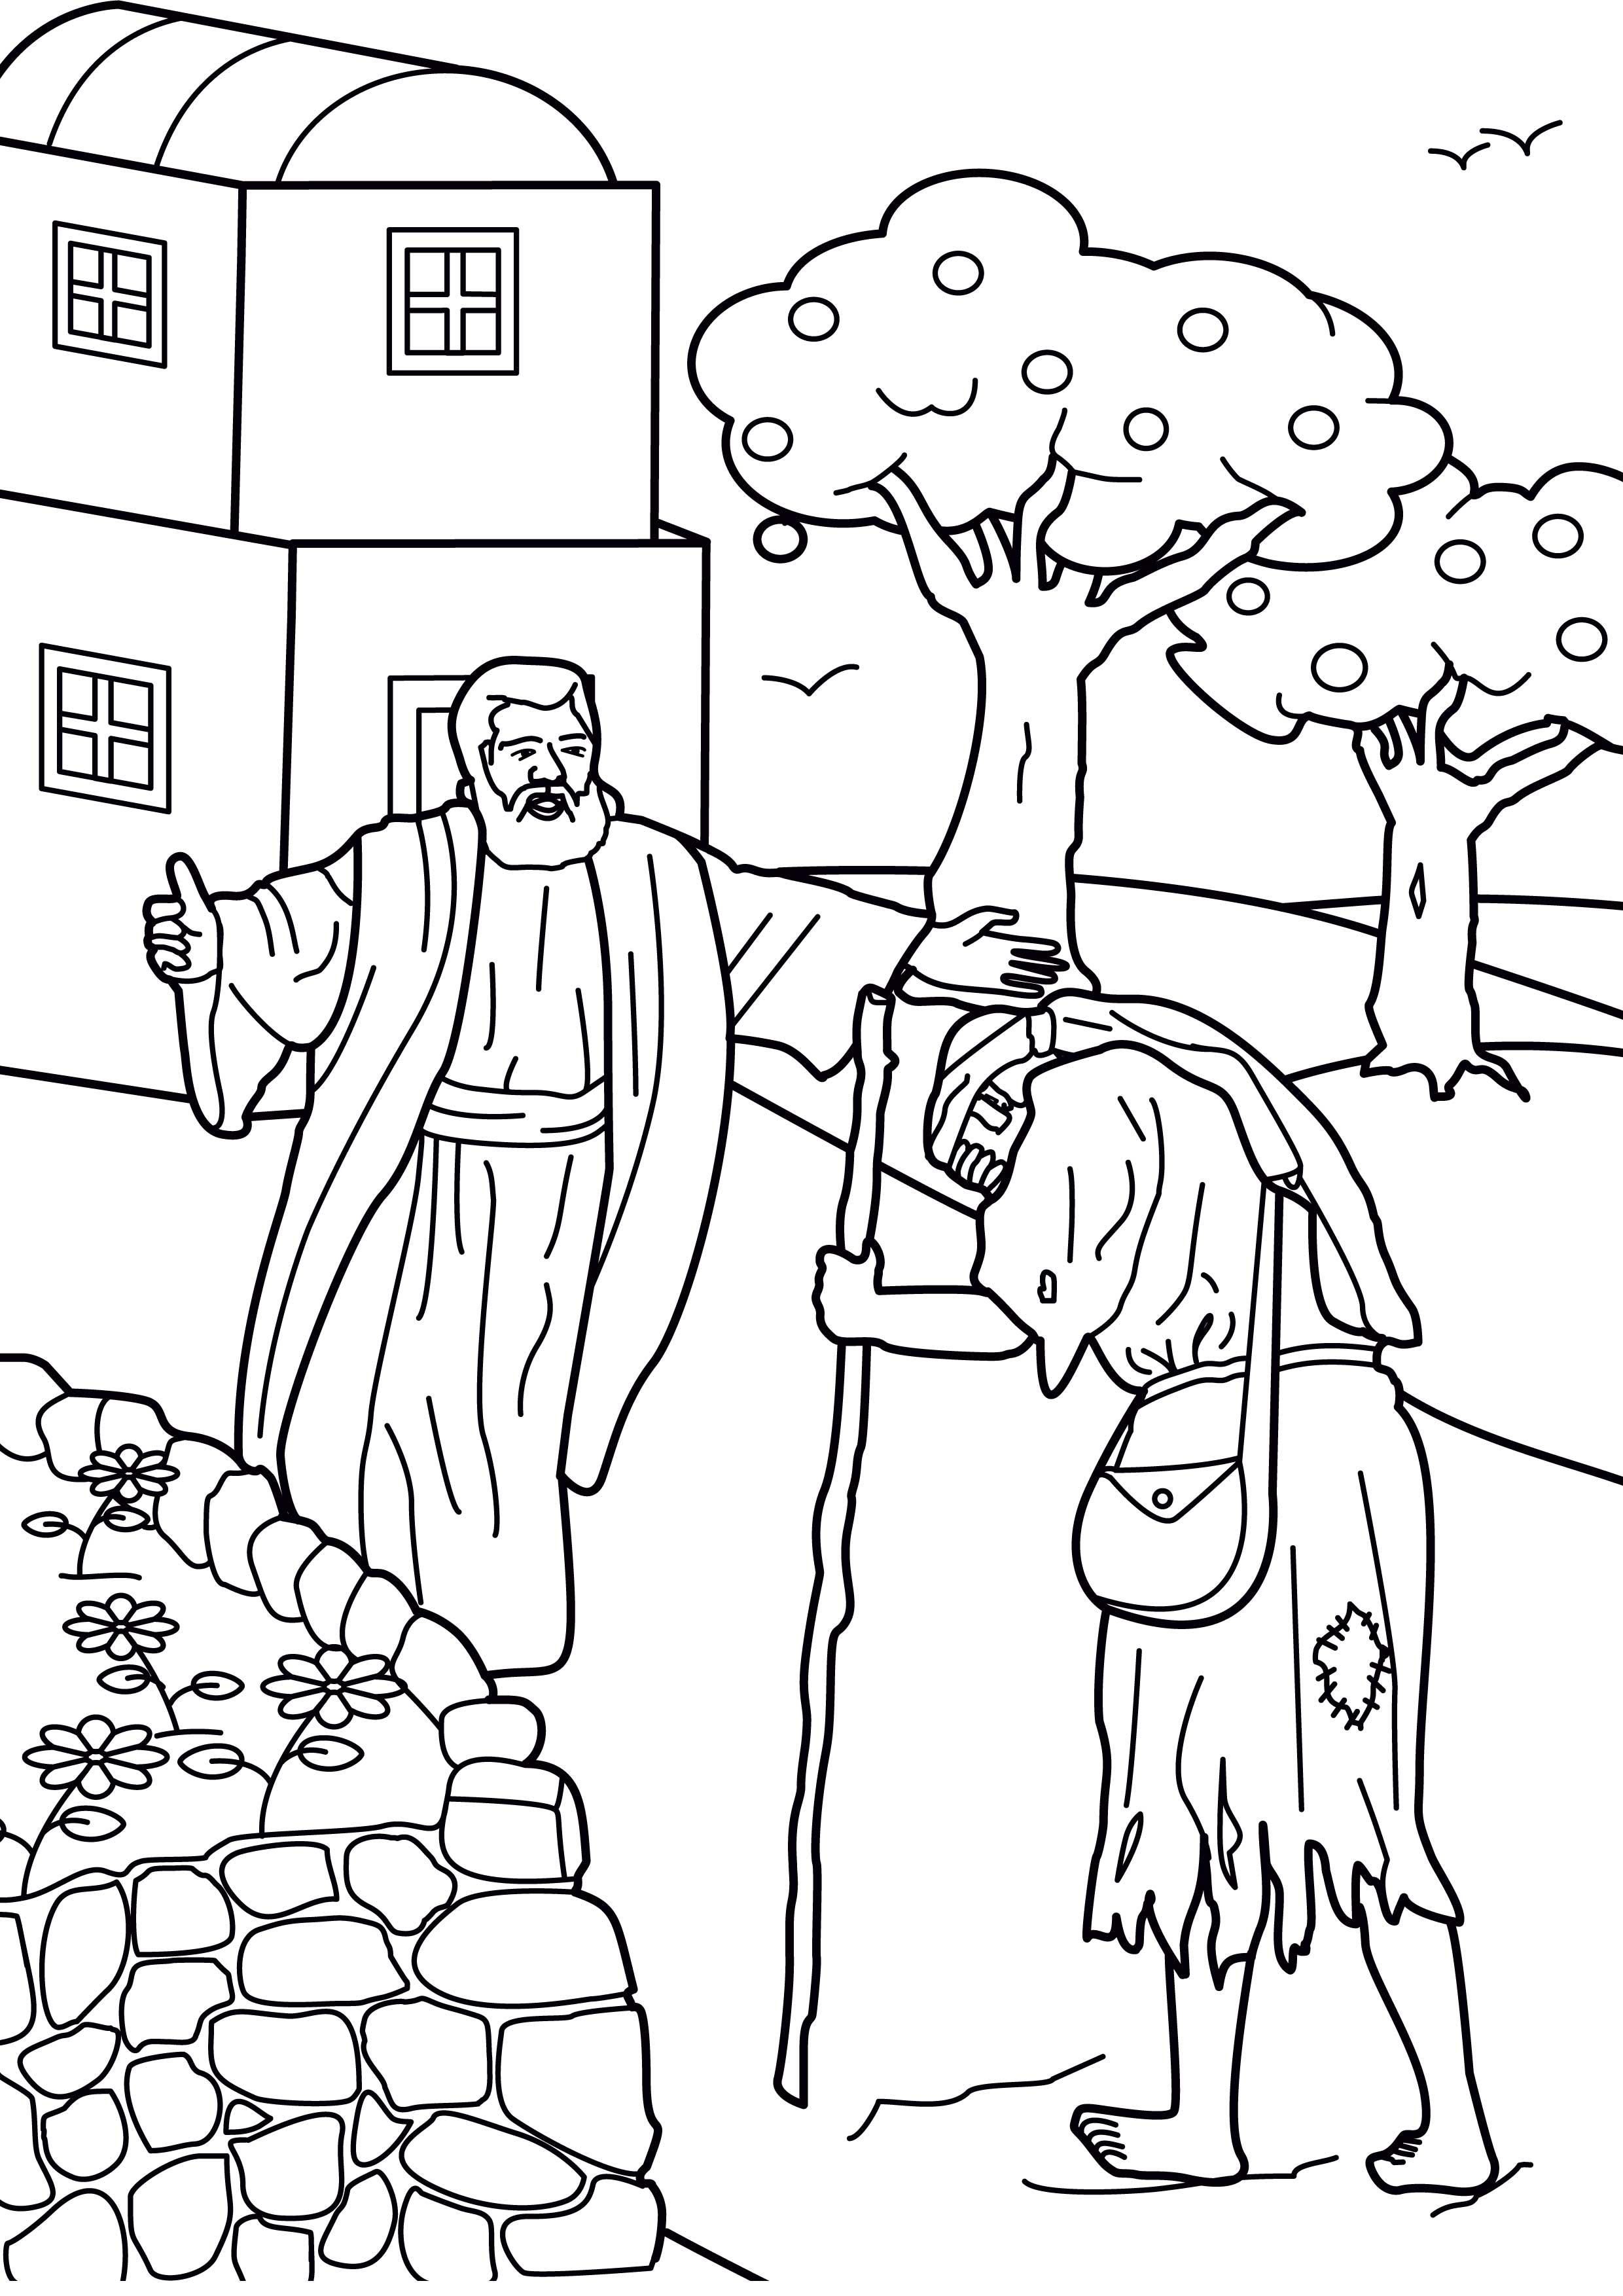 Prodigal Son Coloring Page | Coloring Pages